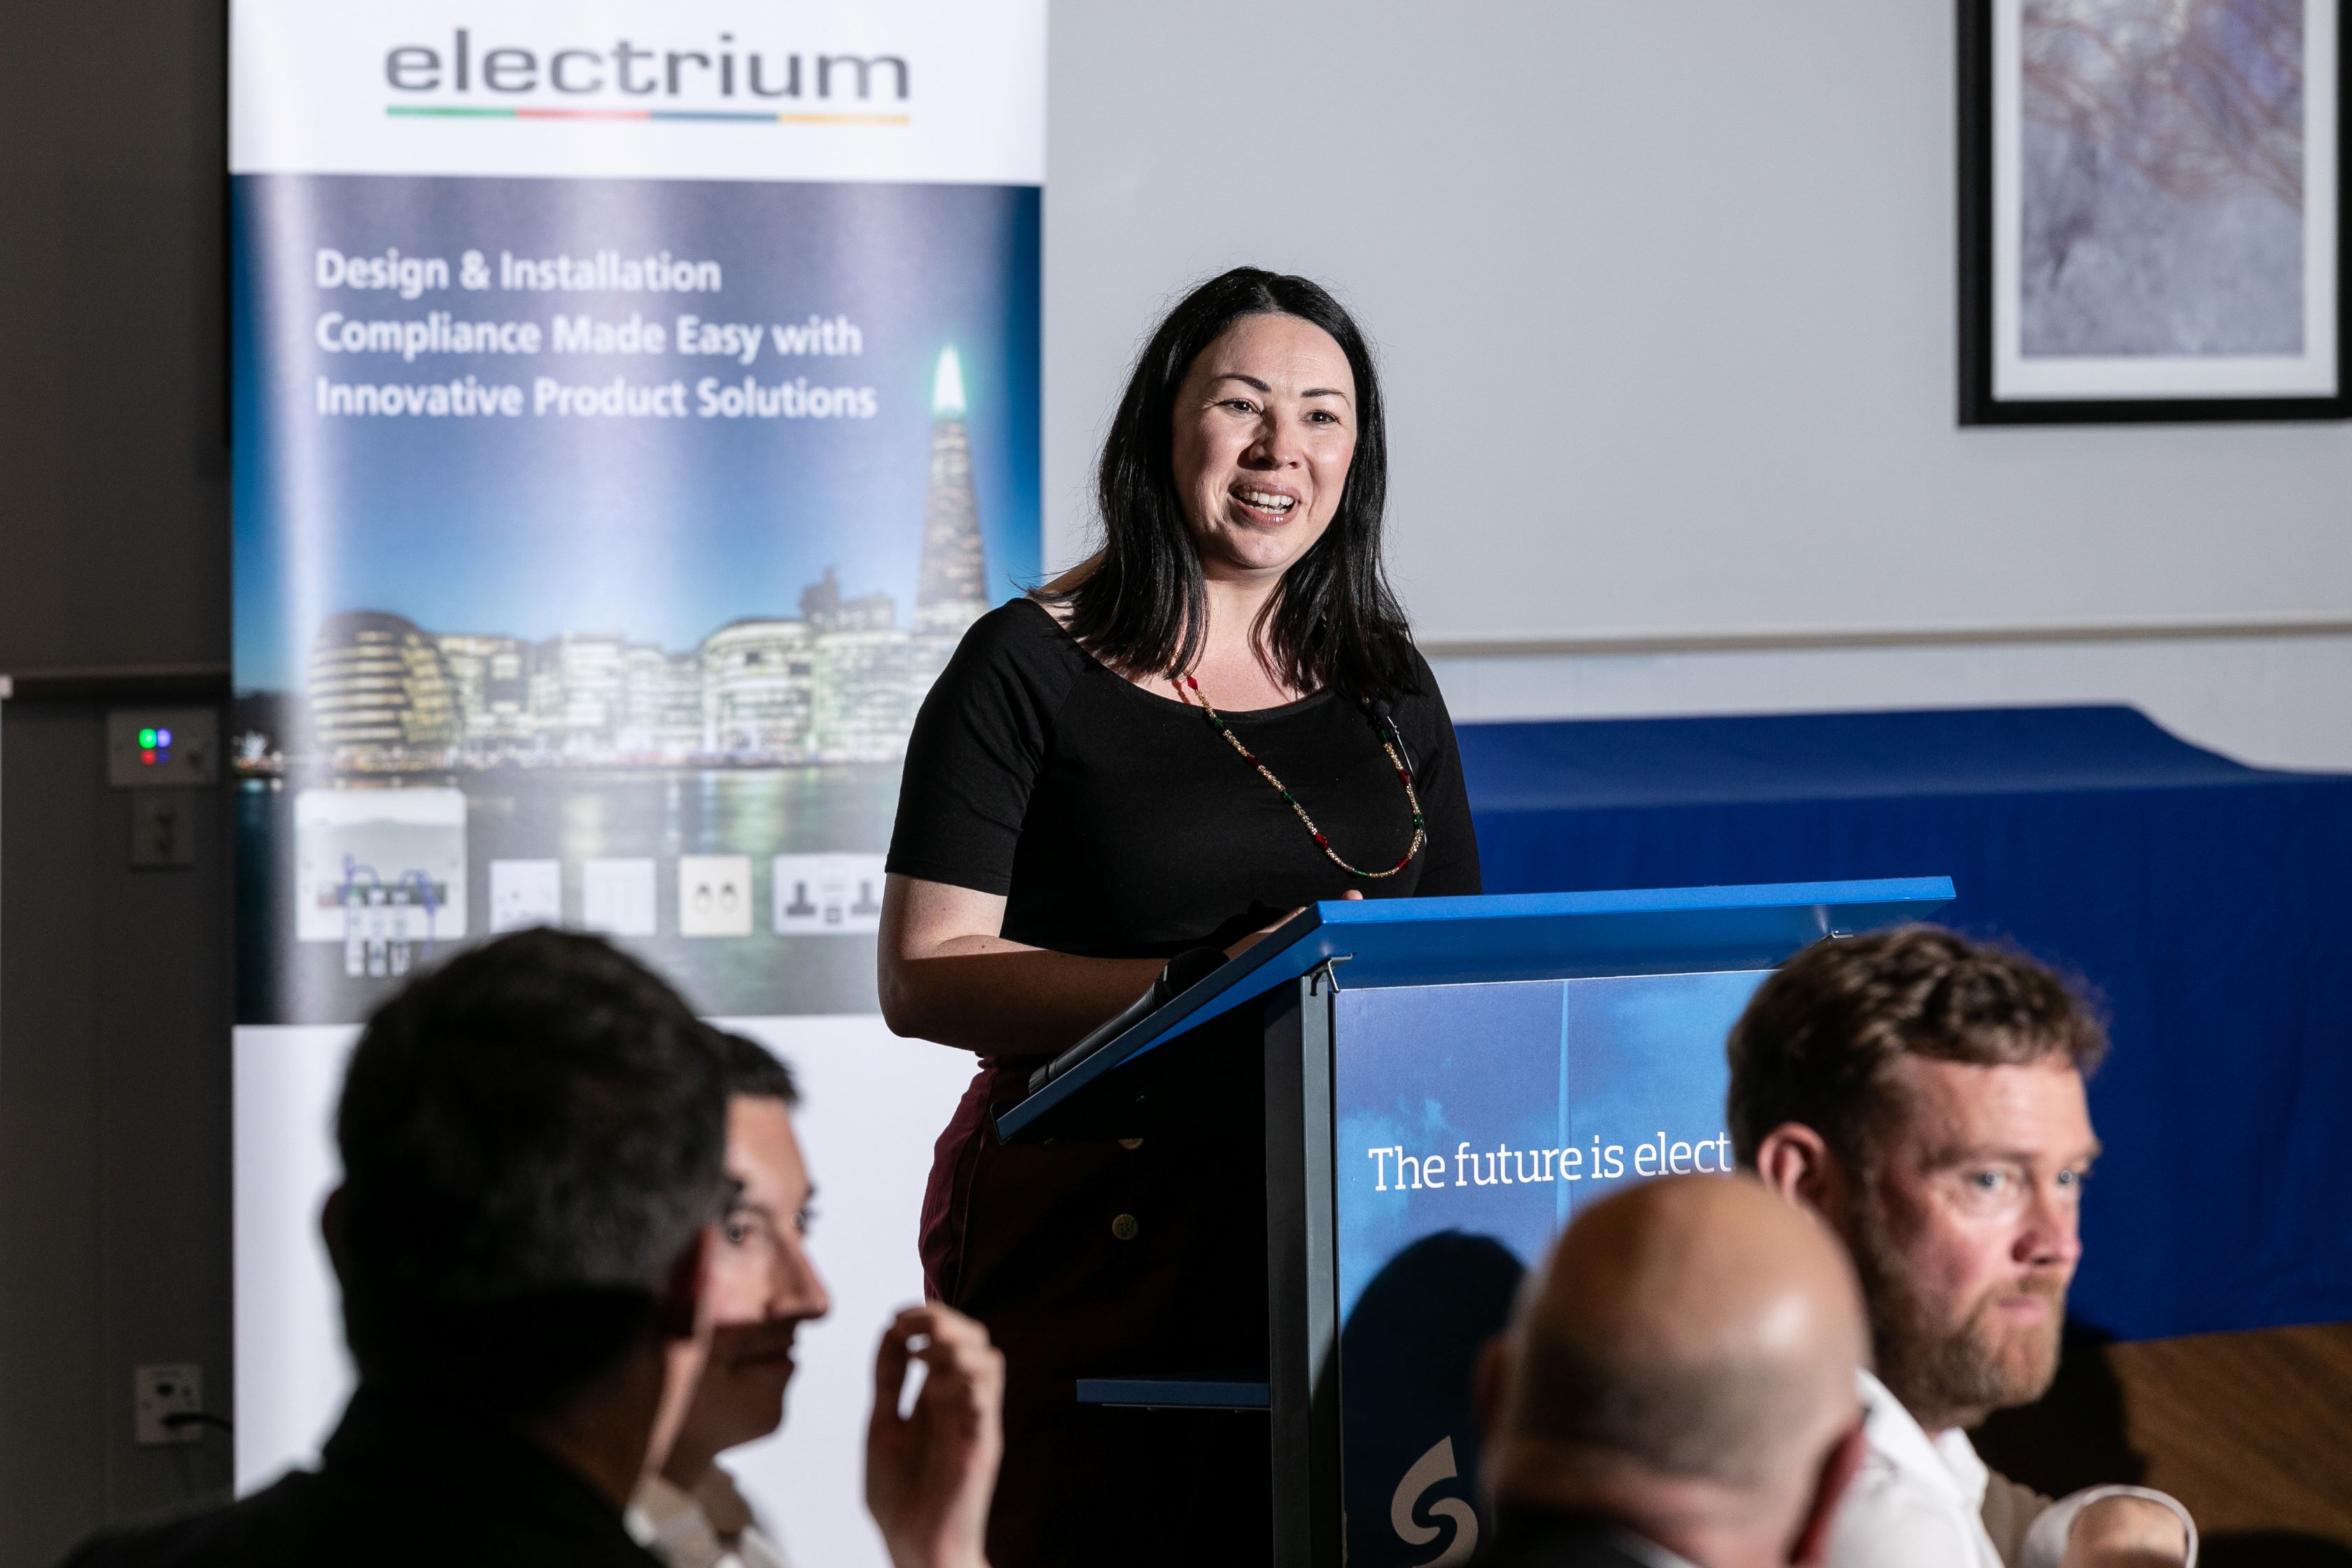 Greater collaboration will bring us closer to net zero, Monica Lennon tells SELECT President’s Lunch